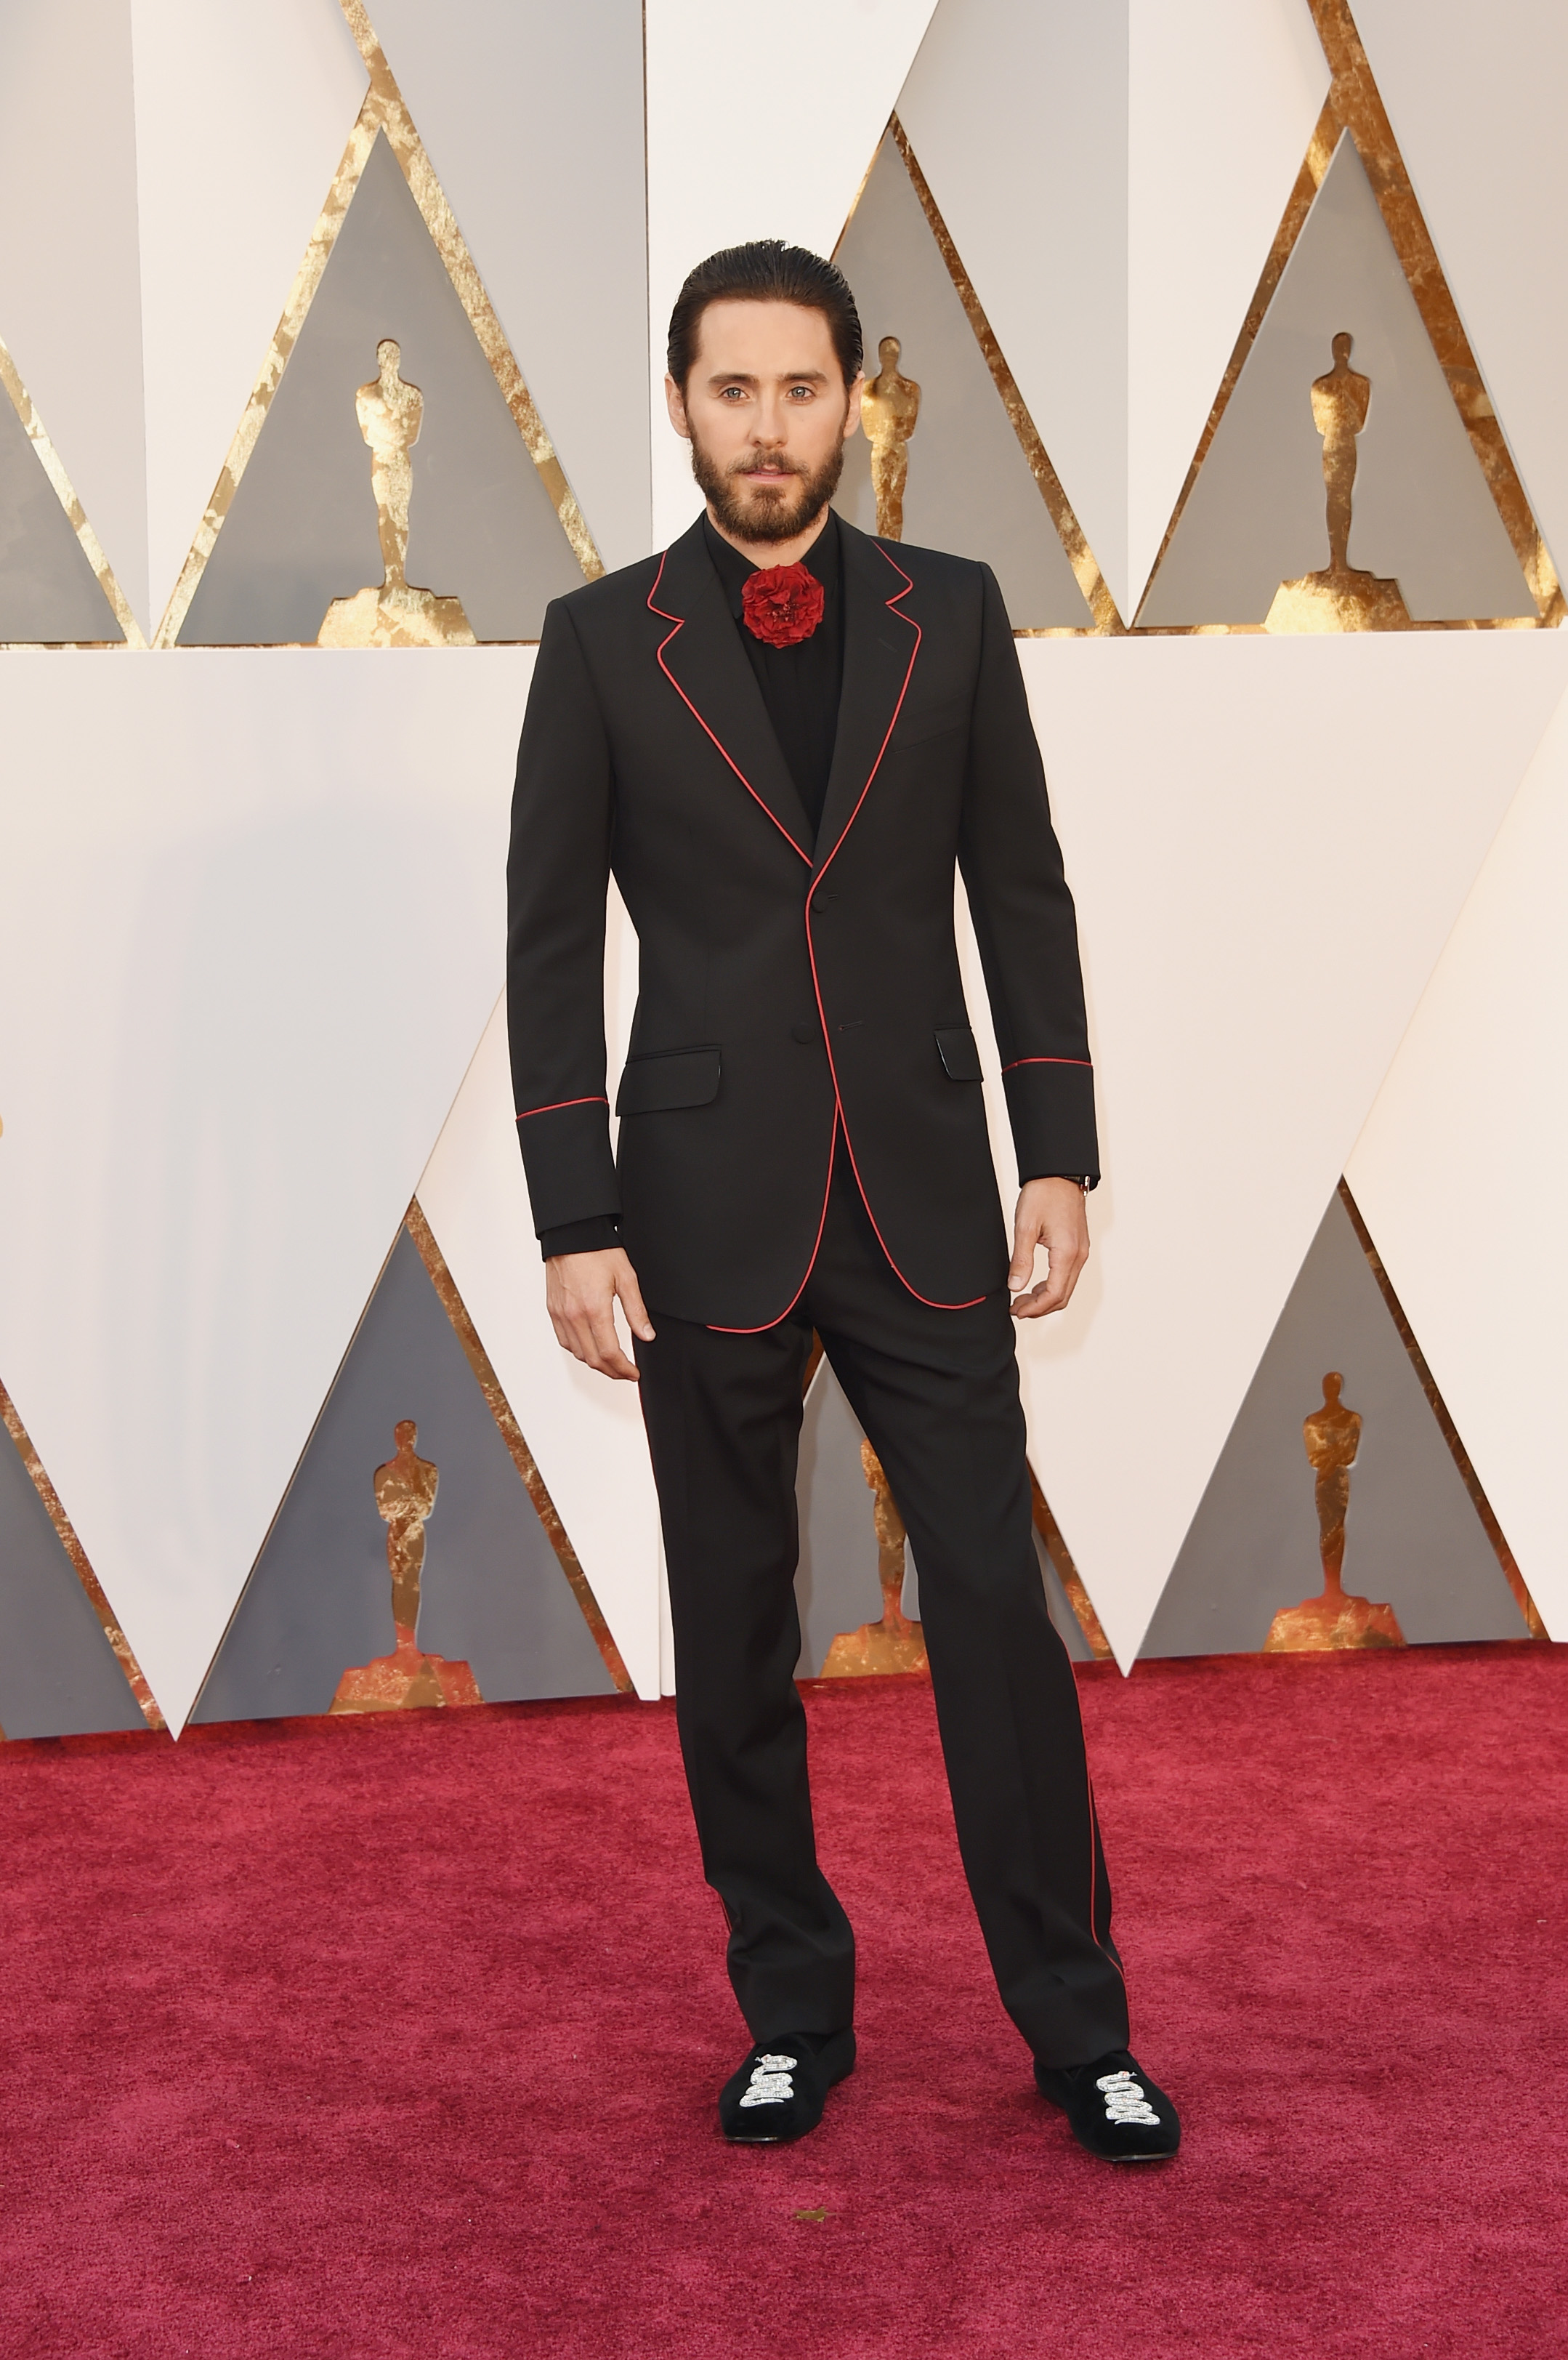 Jared Leto attends the 88th Annual Academy Awards on Feb. 28, 2016 in Hollywood, Calif.